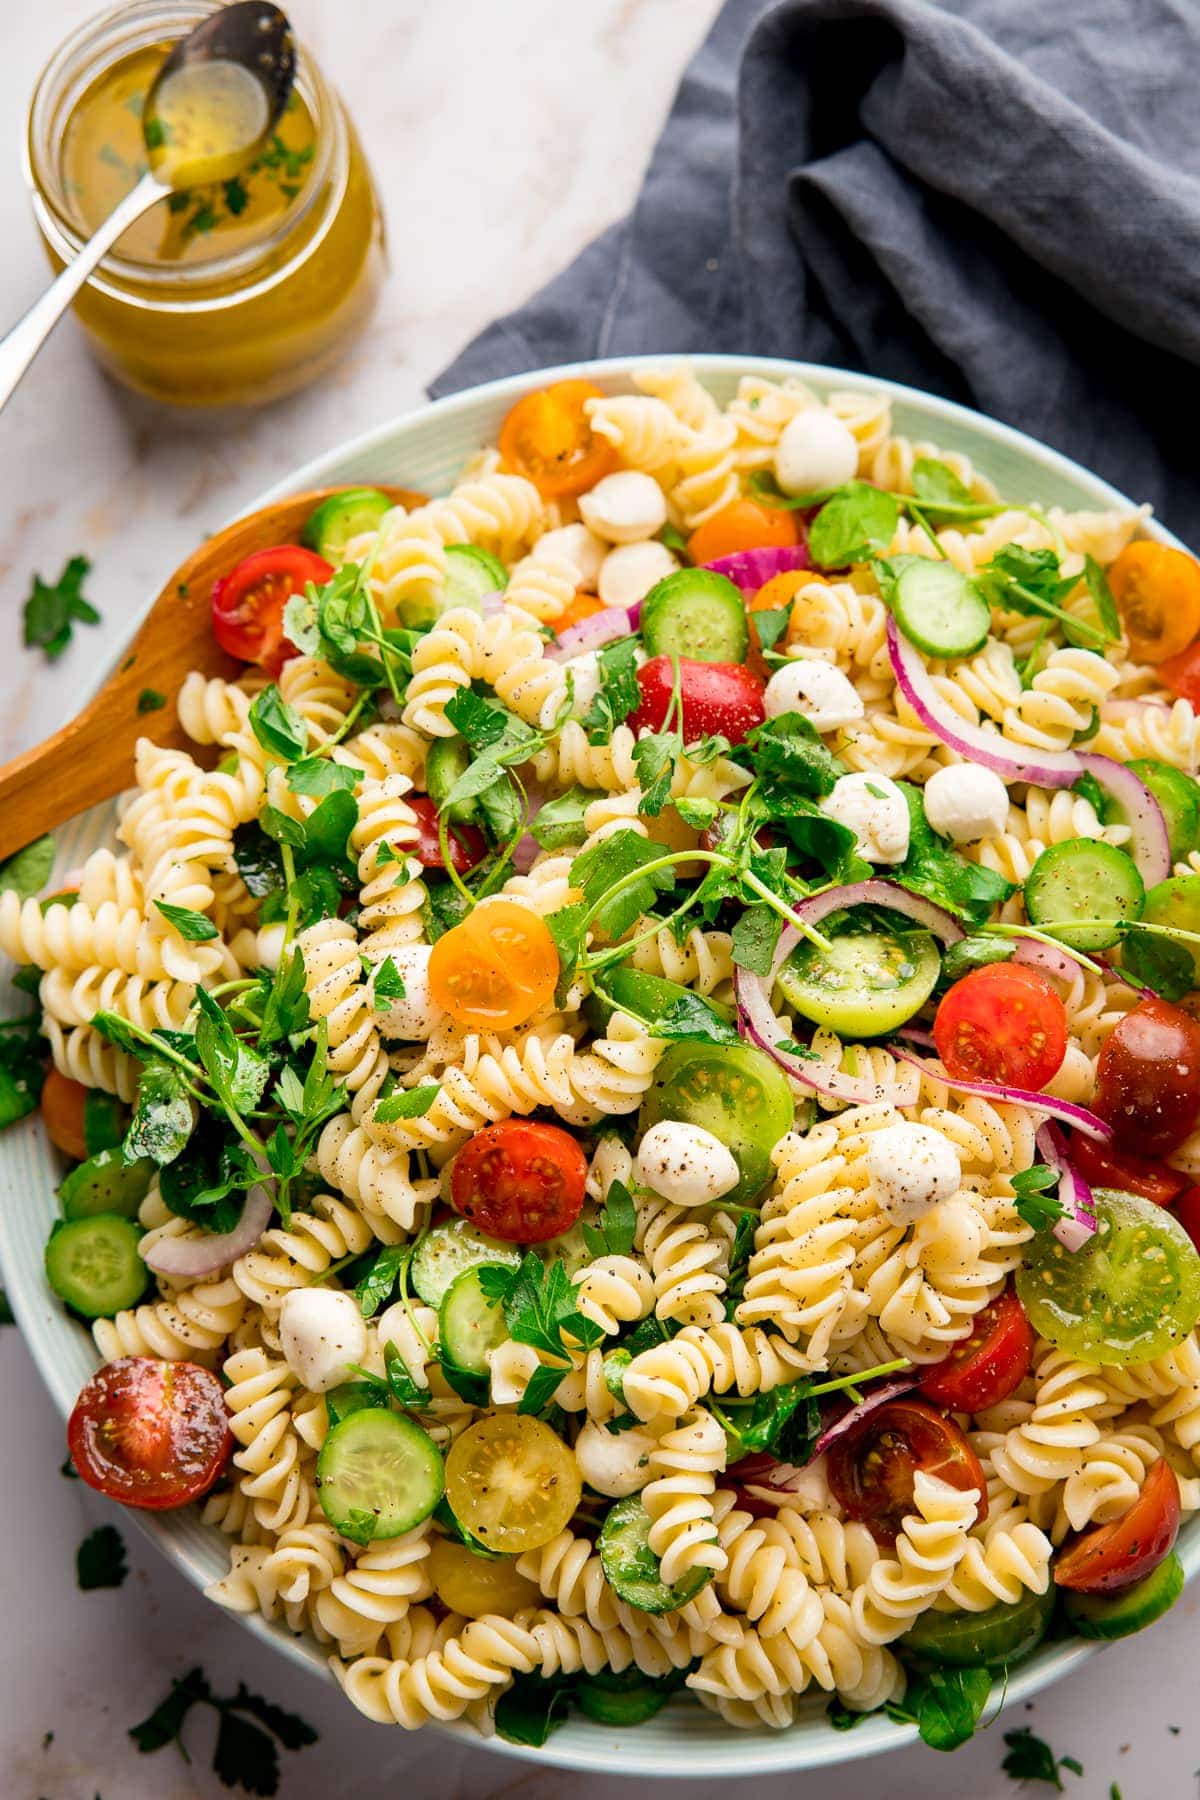 Easy Pasta Salad With The Best Italian Dressing - Nicky's Kitchen Sanctuary